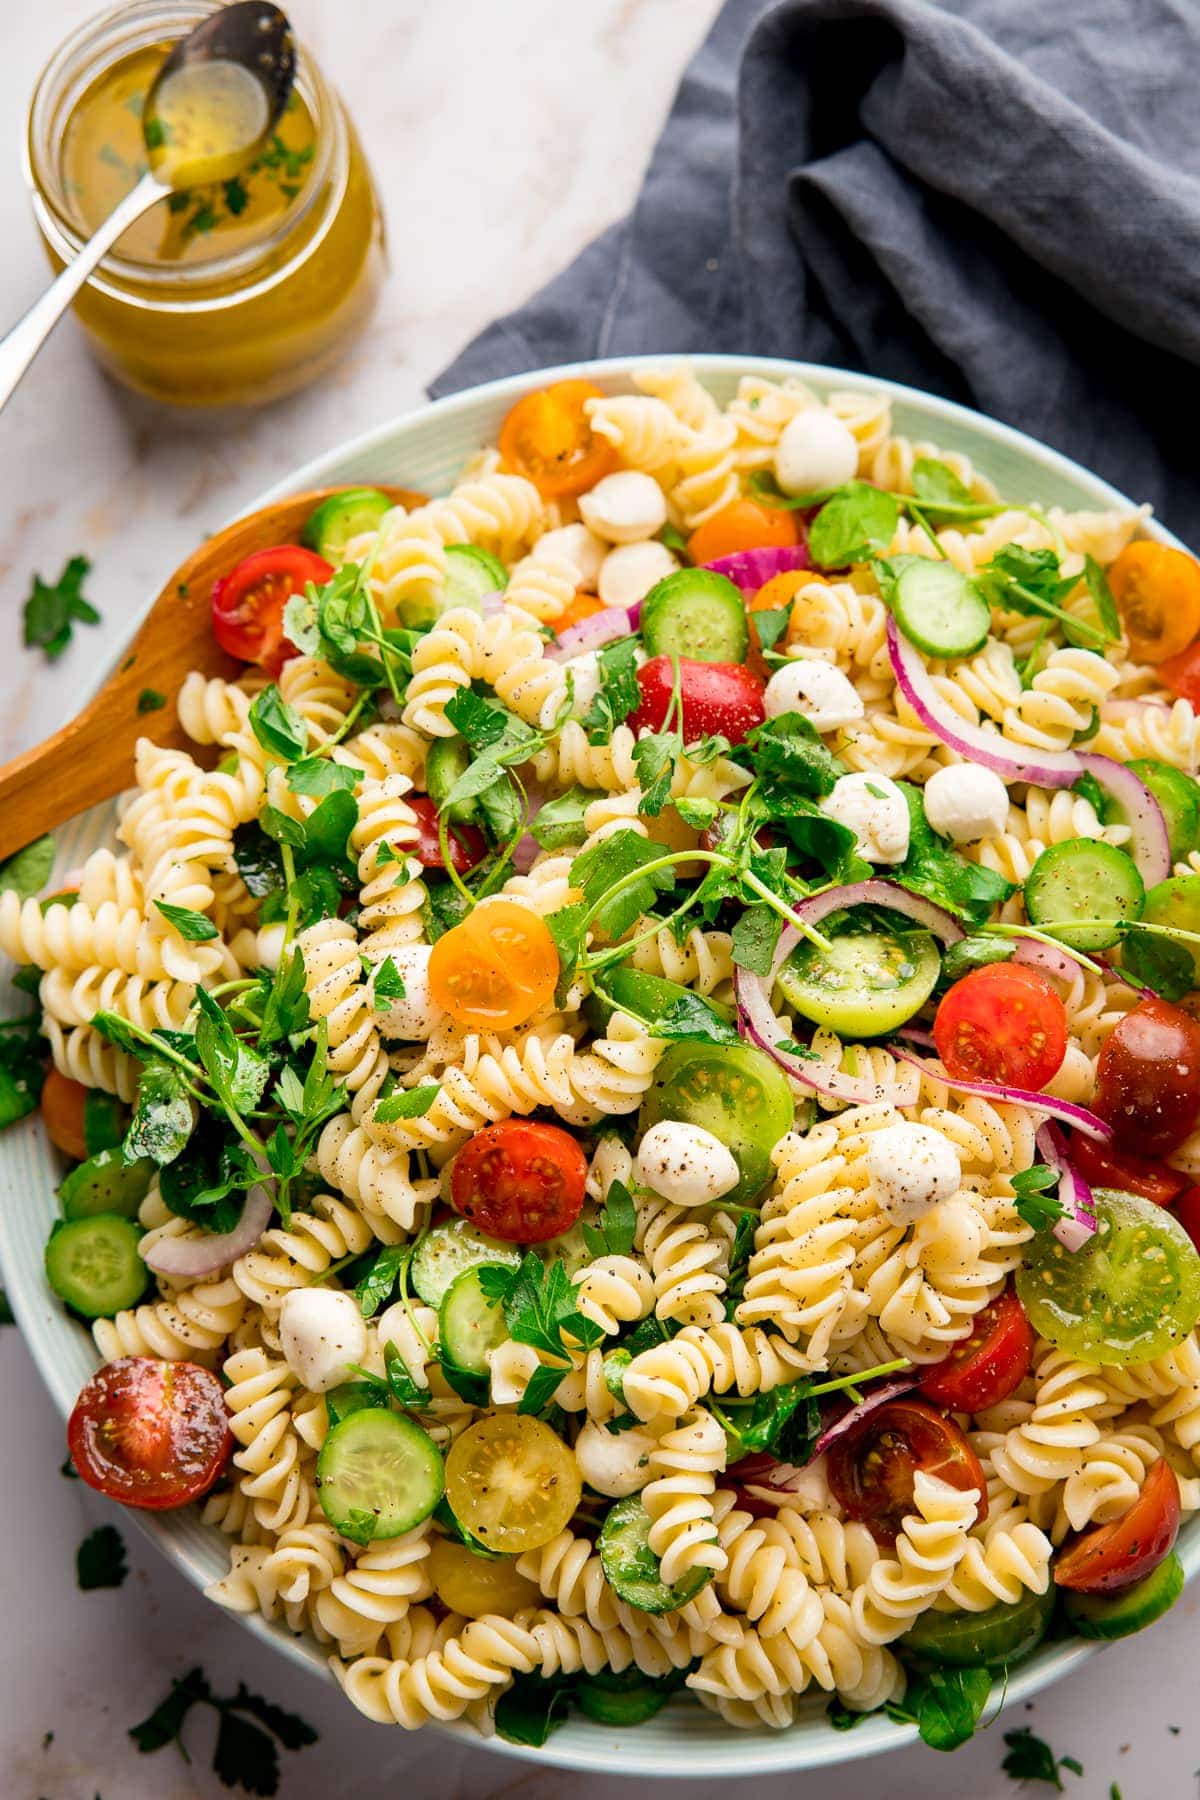 Easy Pasta Salad With The Best Italian Dressing - Nicky's Kitchen Sanctuary